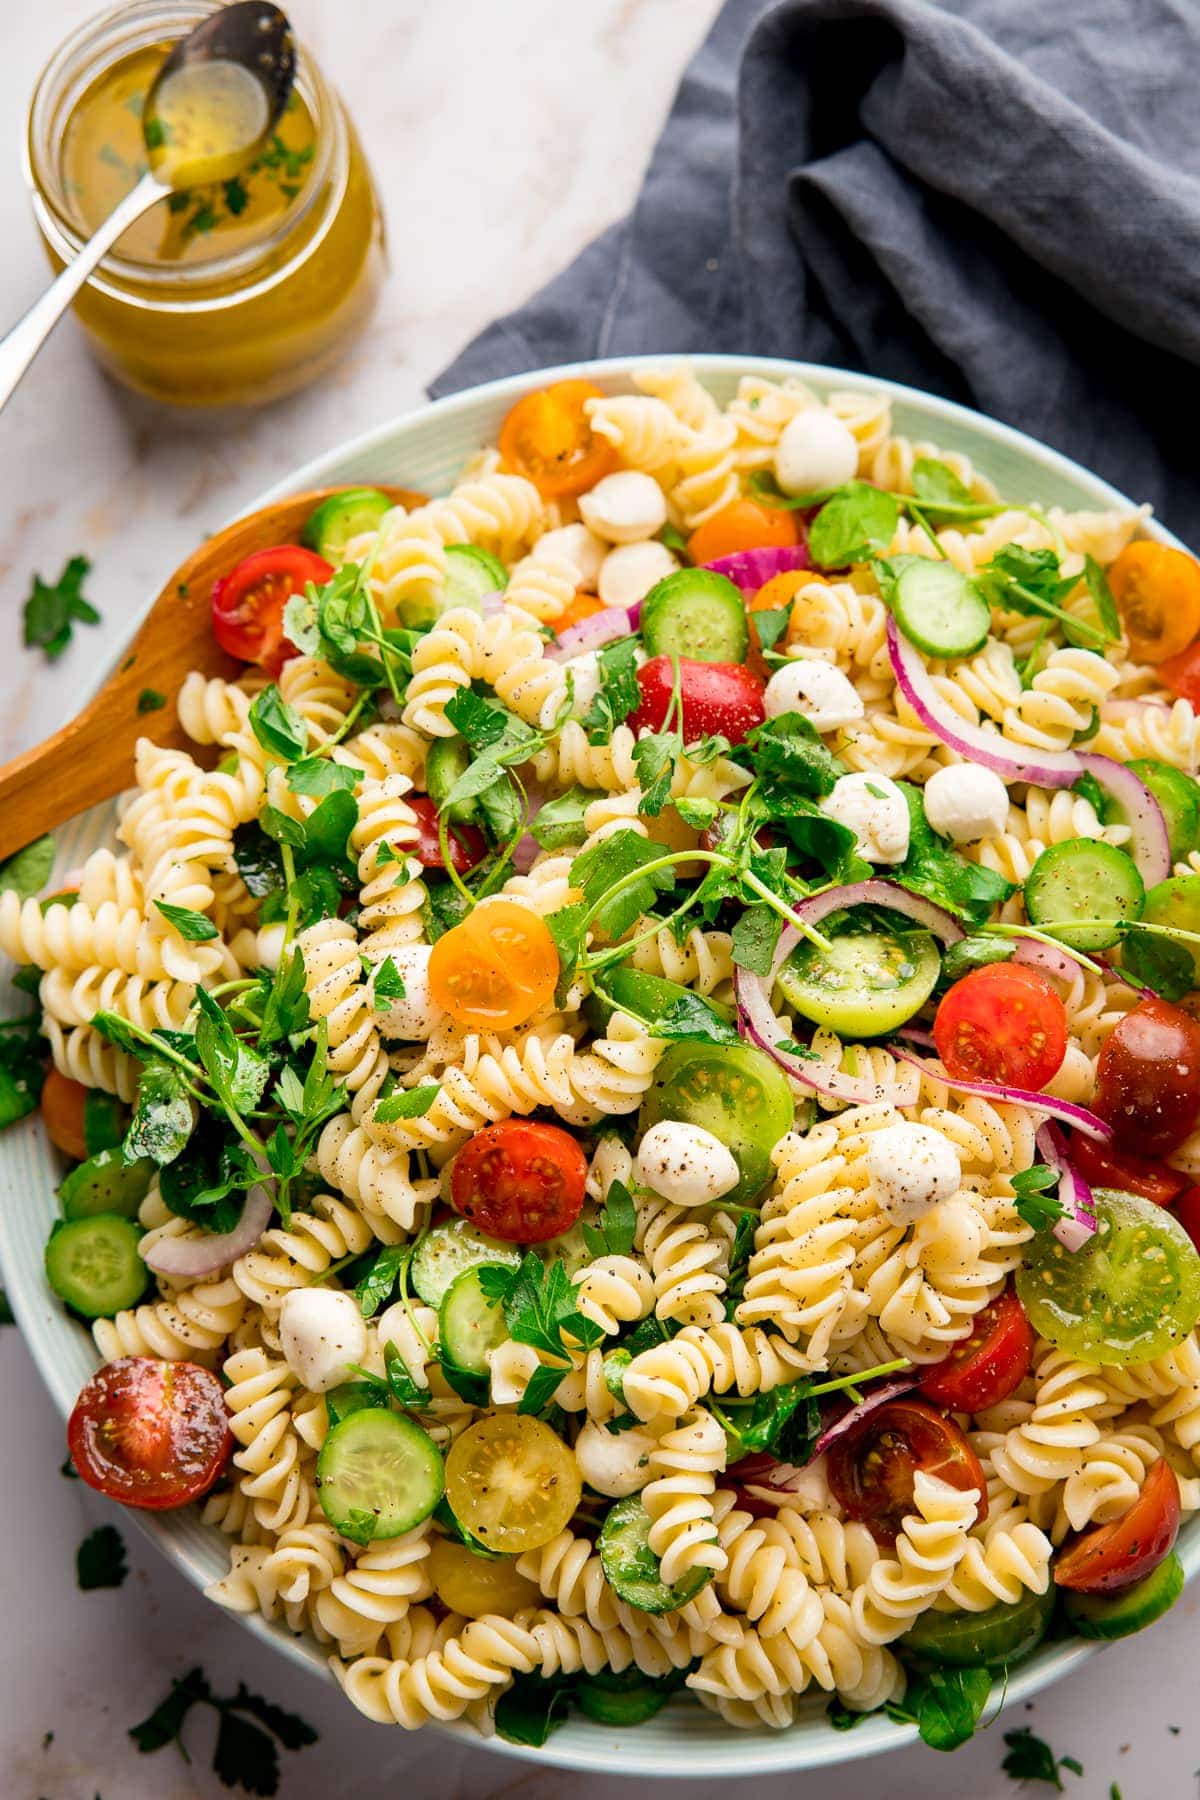 Easy Pasta Salad With The Best Italian Dressing - Nicky's Kitchen Sanctuary